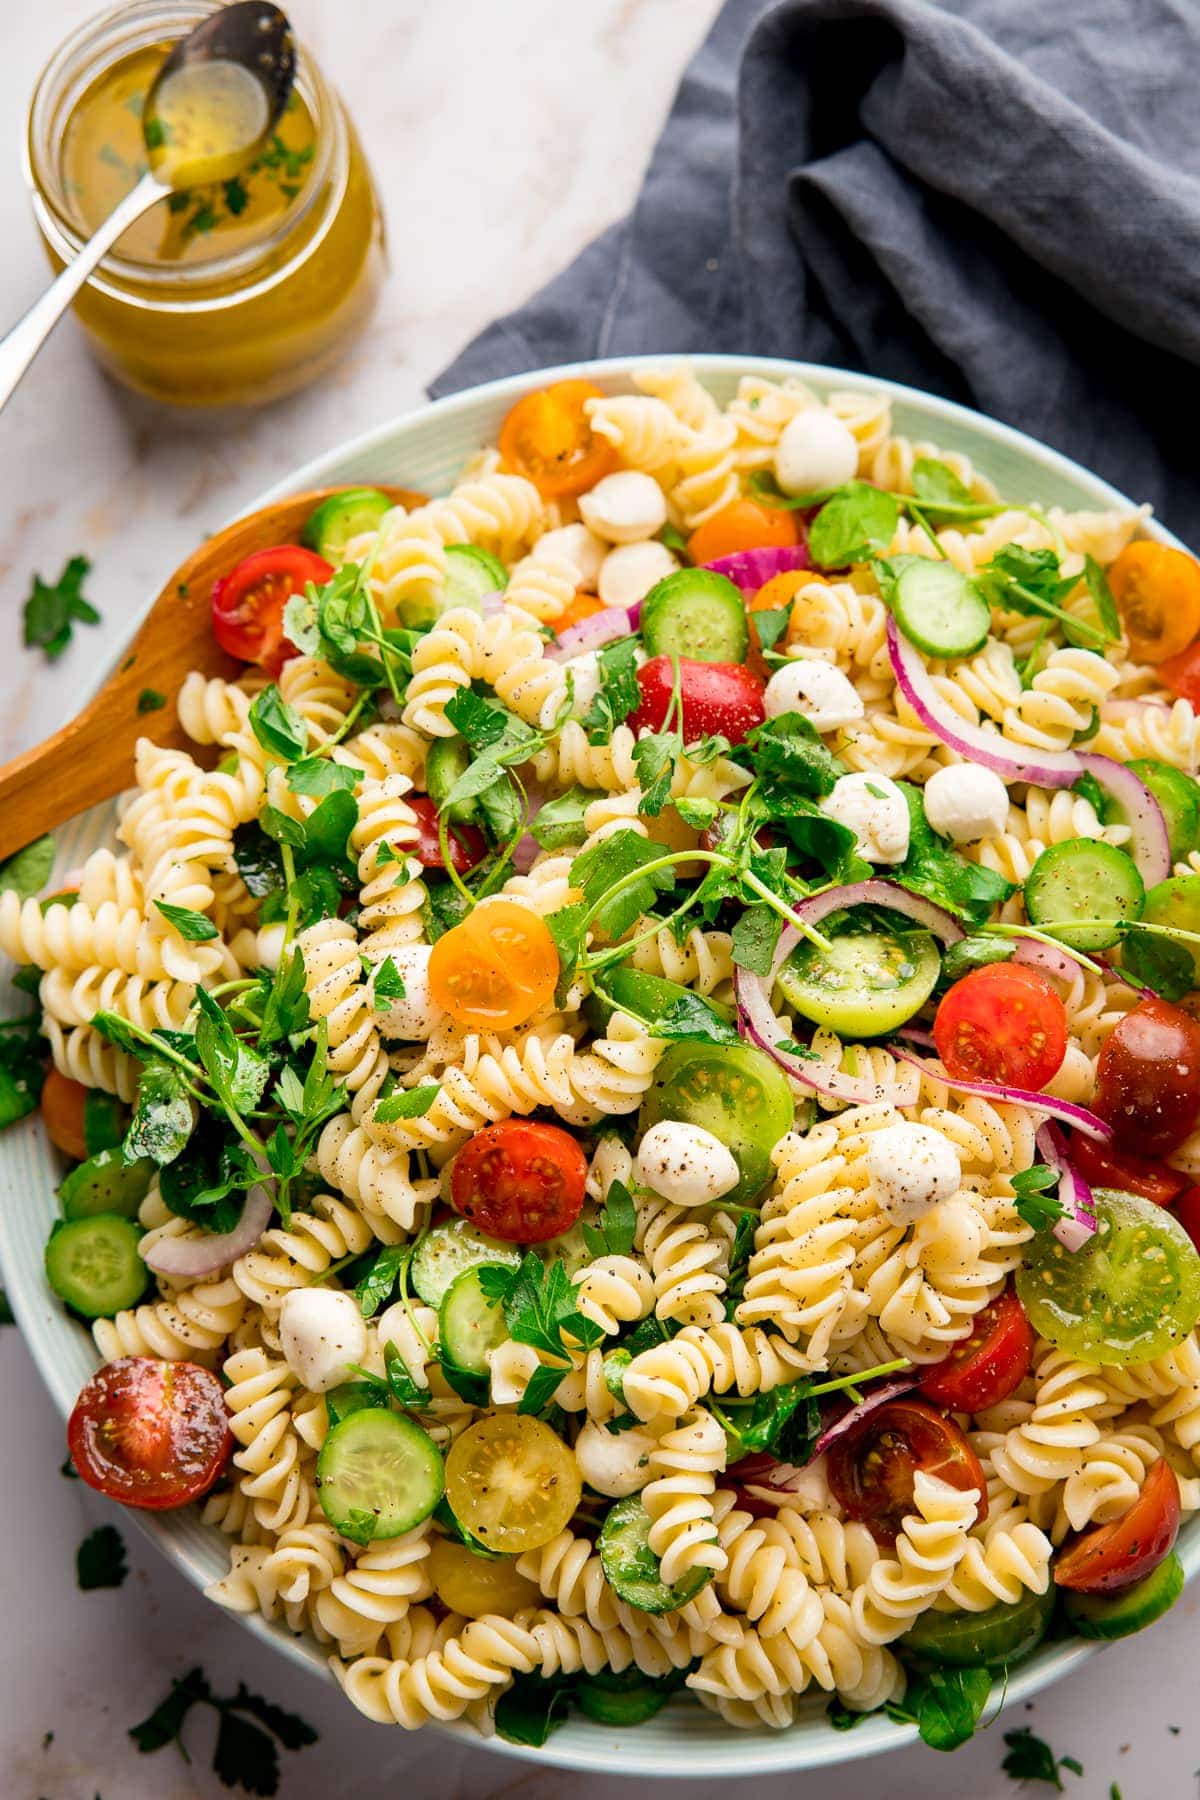 Easy Pasta Salad With The Best Italian Dressing - Nicky's Kitchen Sanctuary